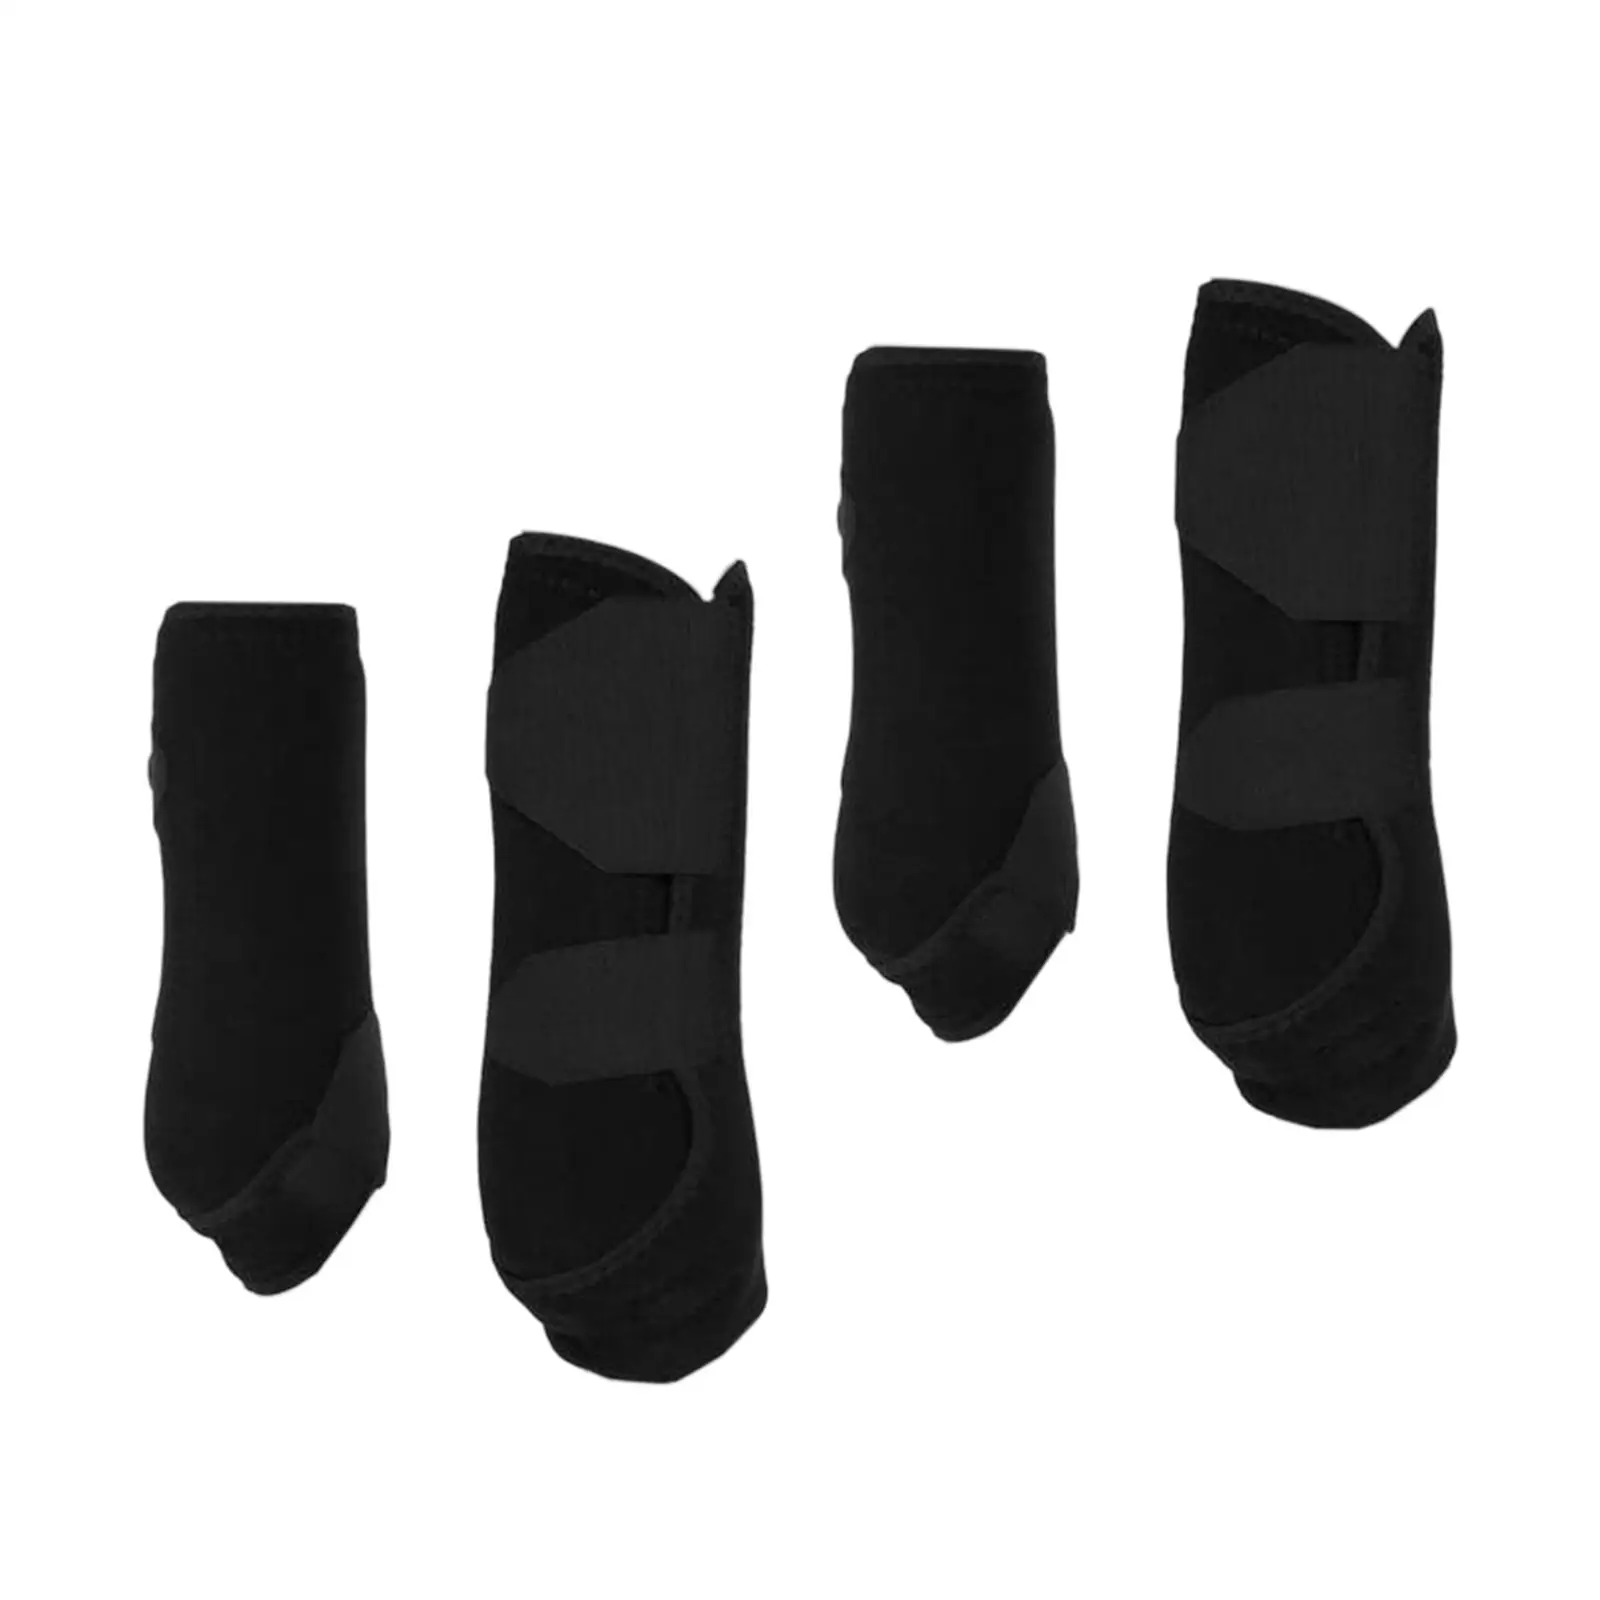 4Pcs Neoprene Horse Boots Leg Wraps, Shockproof Tendon Protection for Jumping